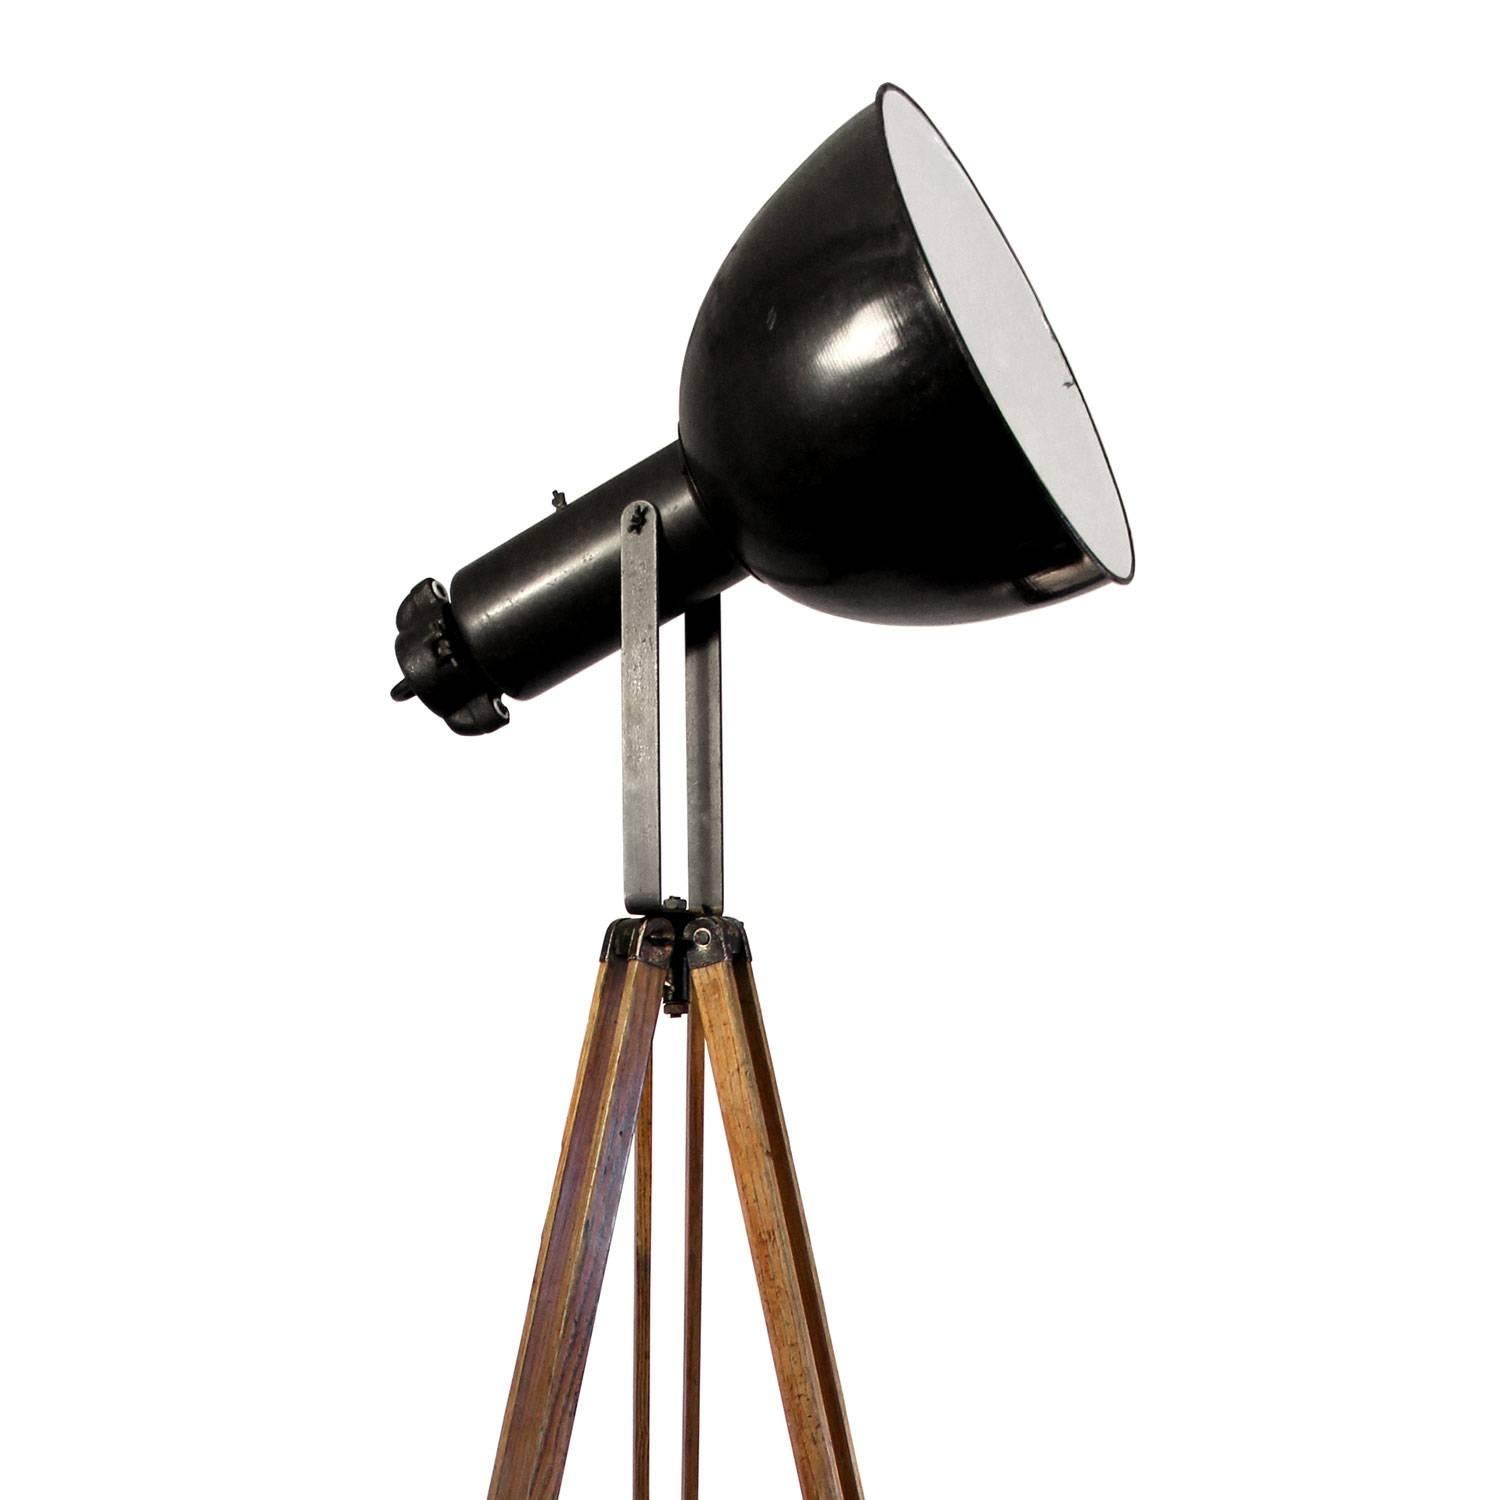 Vintage Industrial spotlight on wooden tripod. 
Adjustable height and angle. Black enamel spot with white interior. Diameter 42 cm. Weight 13.0 kg / 28.7 lb. Total height as shown in picture: 195 cm. 

All lamps have been made suitable by